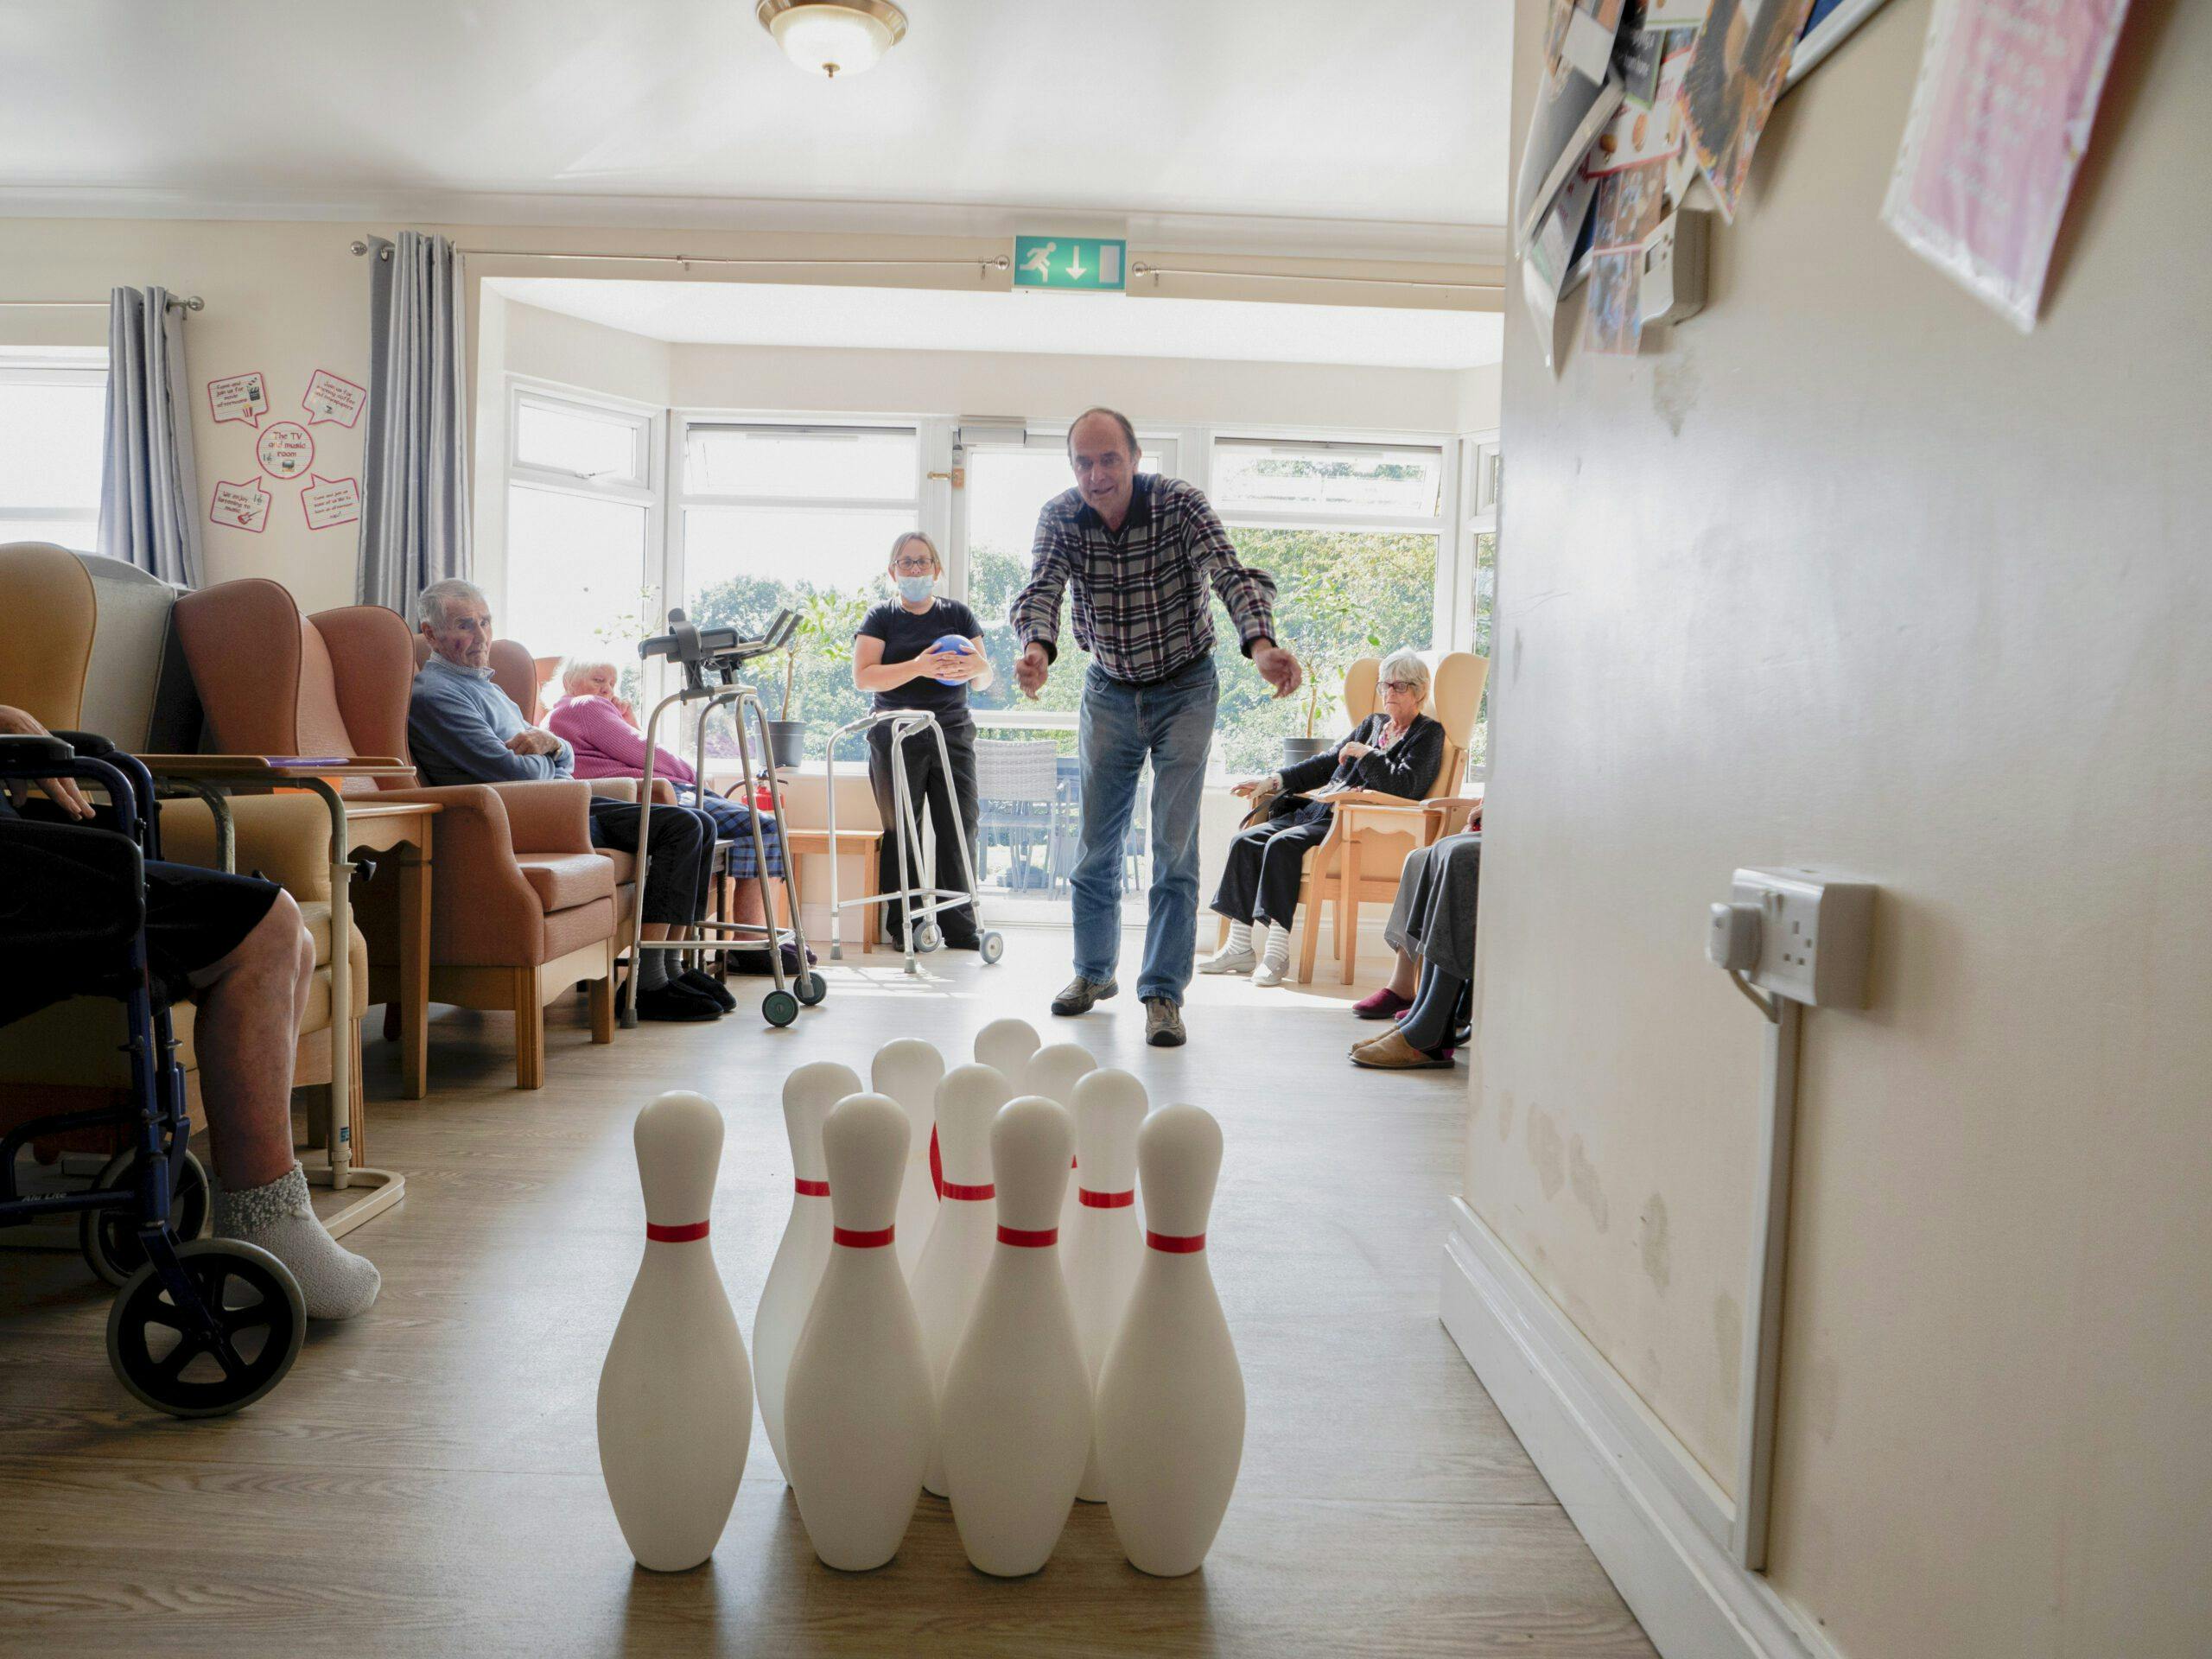 Activities of Roselands care home in Rye, East Sussex